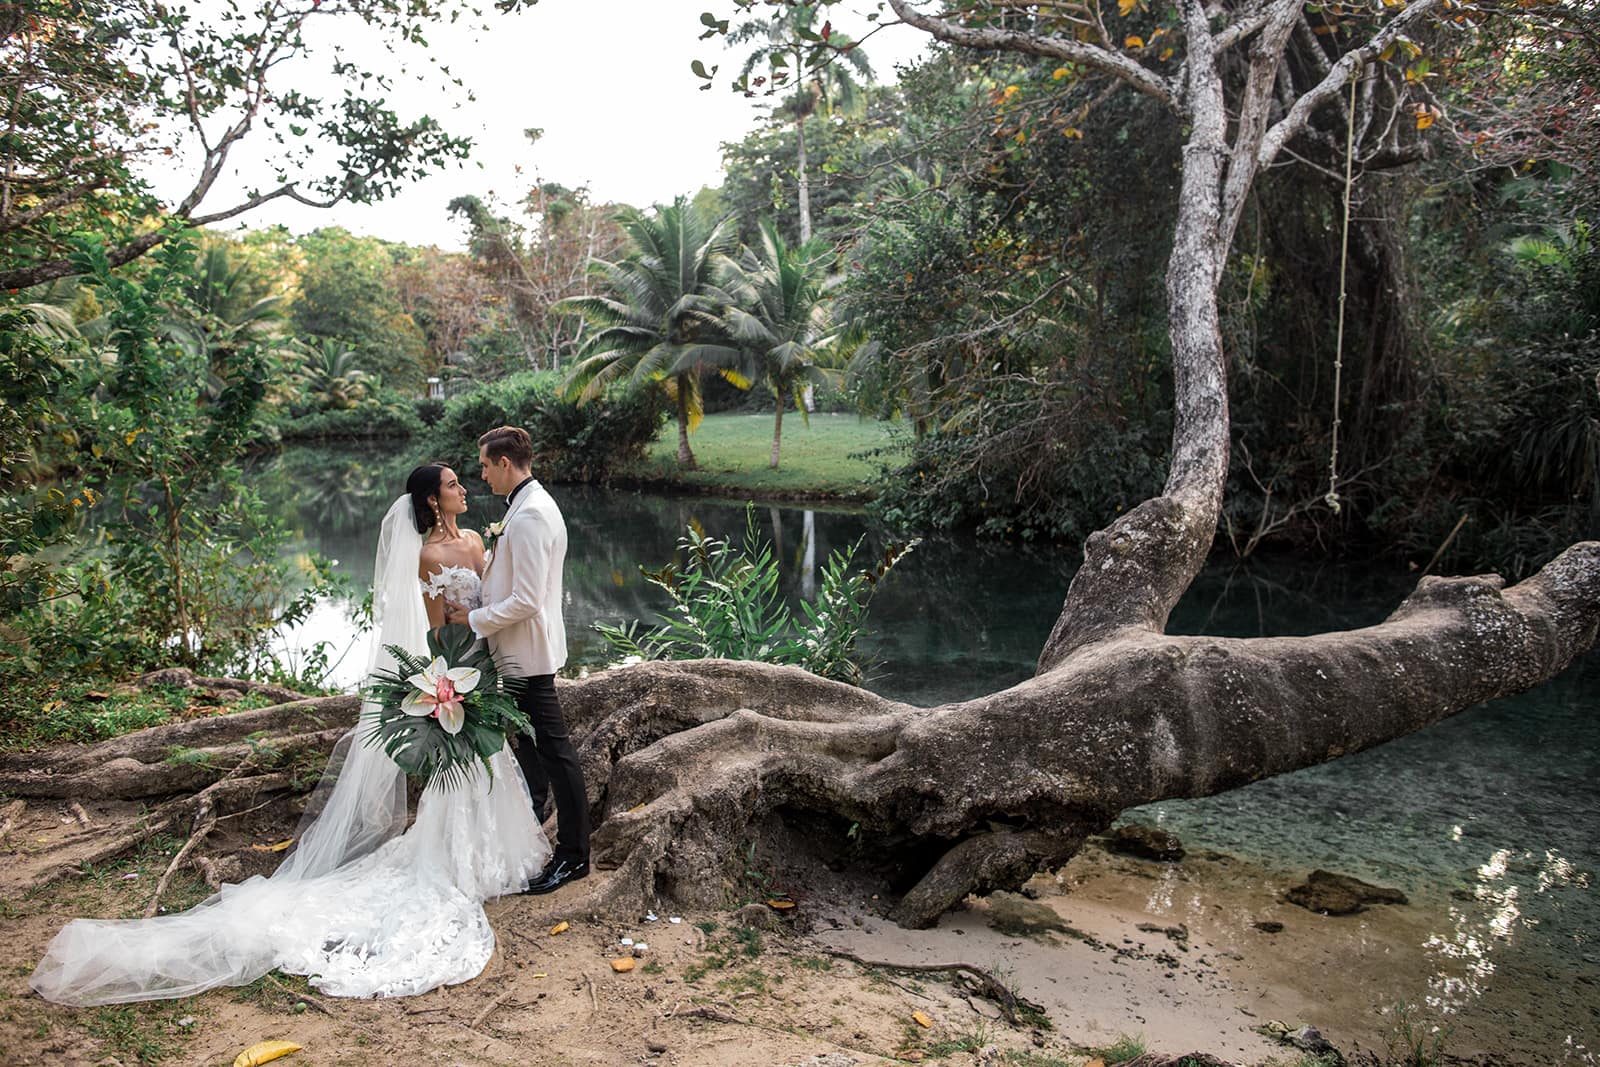 Bride and groom embrace next to a large tree in the rainforest in Jamaica